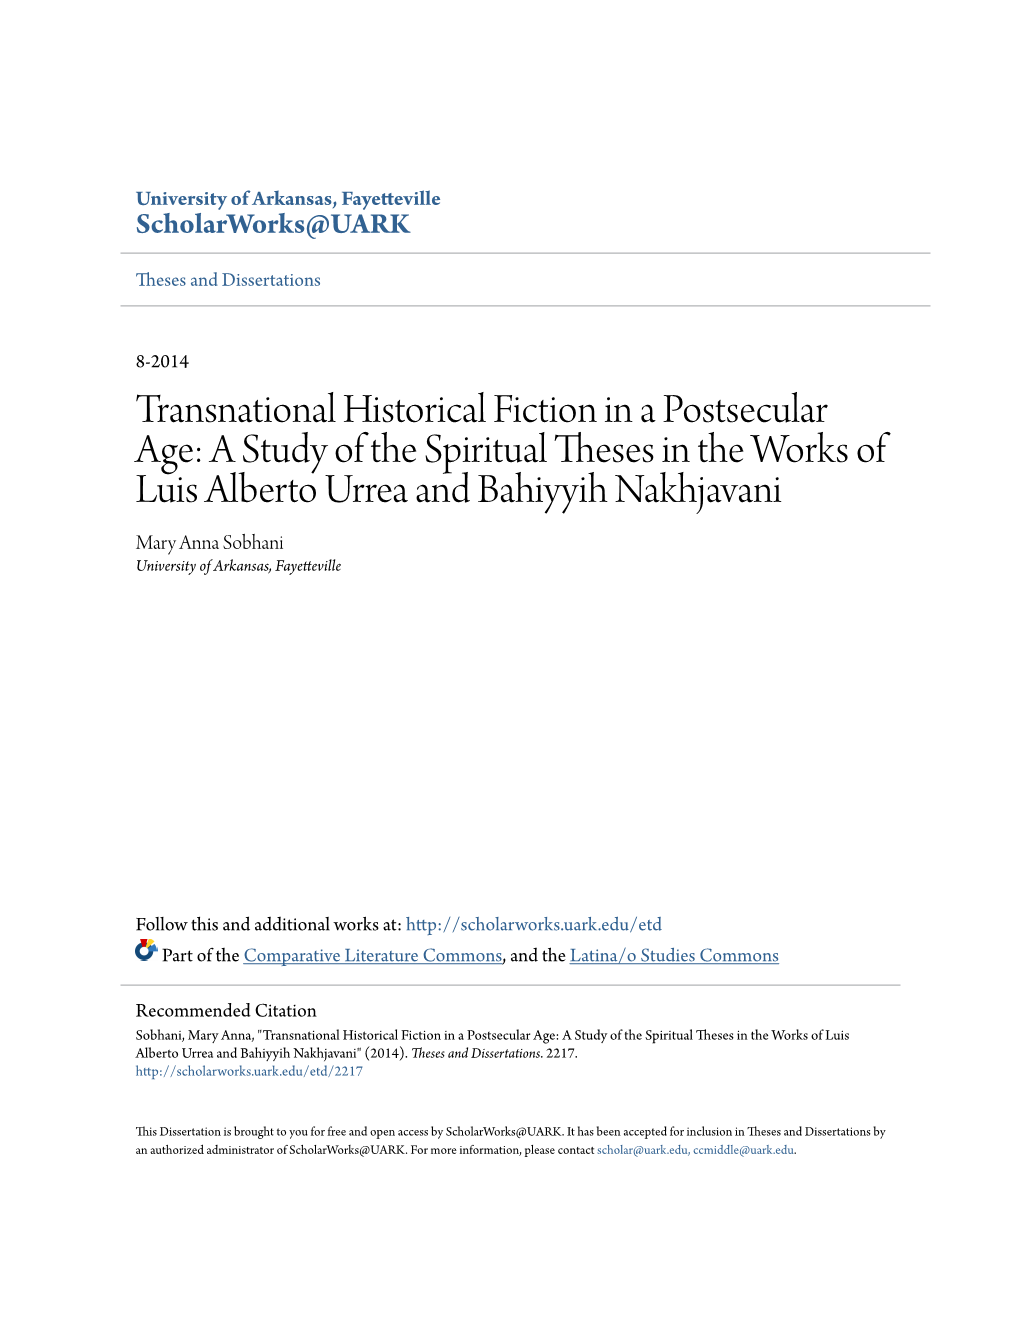 Transnational Historical Fiction in a Postsecular Age: a Study of The